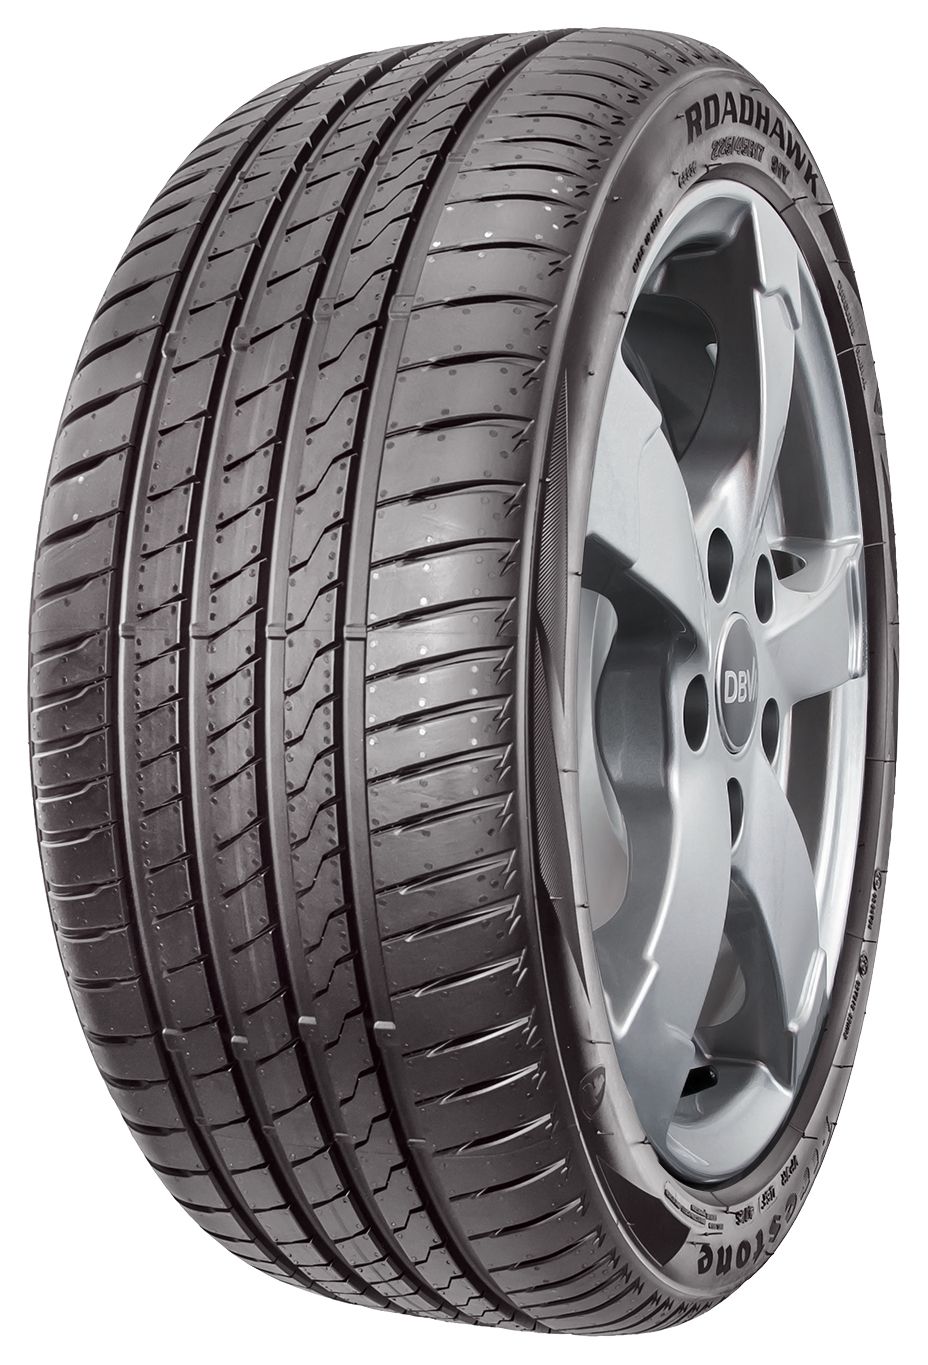 Firestone and Reviews RoadHawk Tests - Tyre